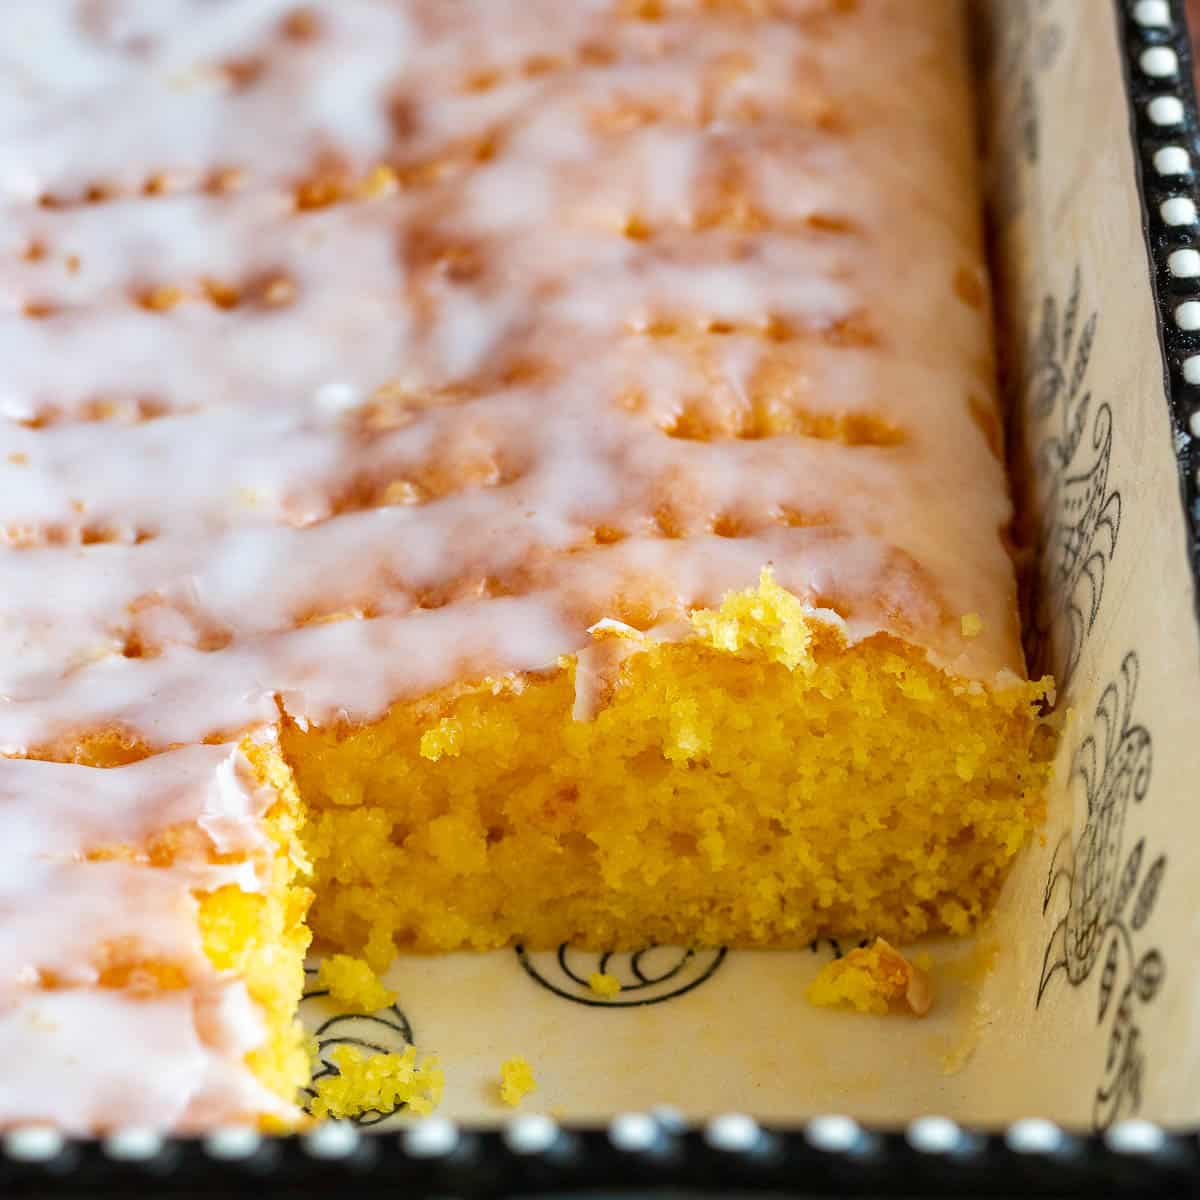 One slice cut out of the sheet pan with jello lemon poke cake.